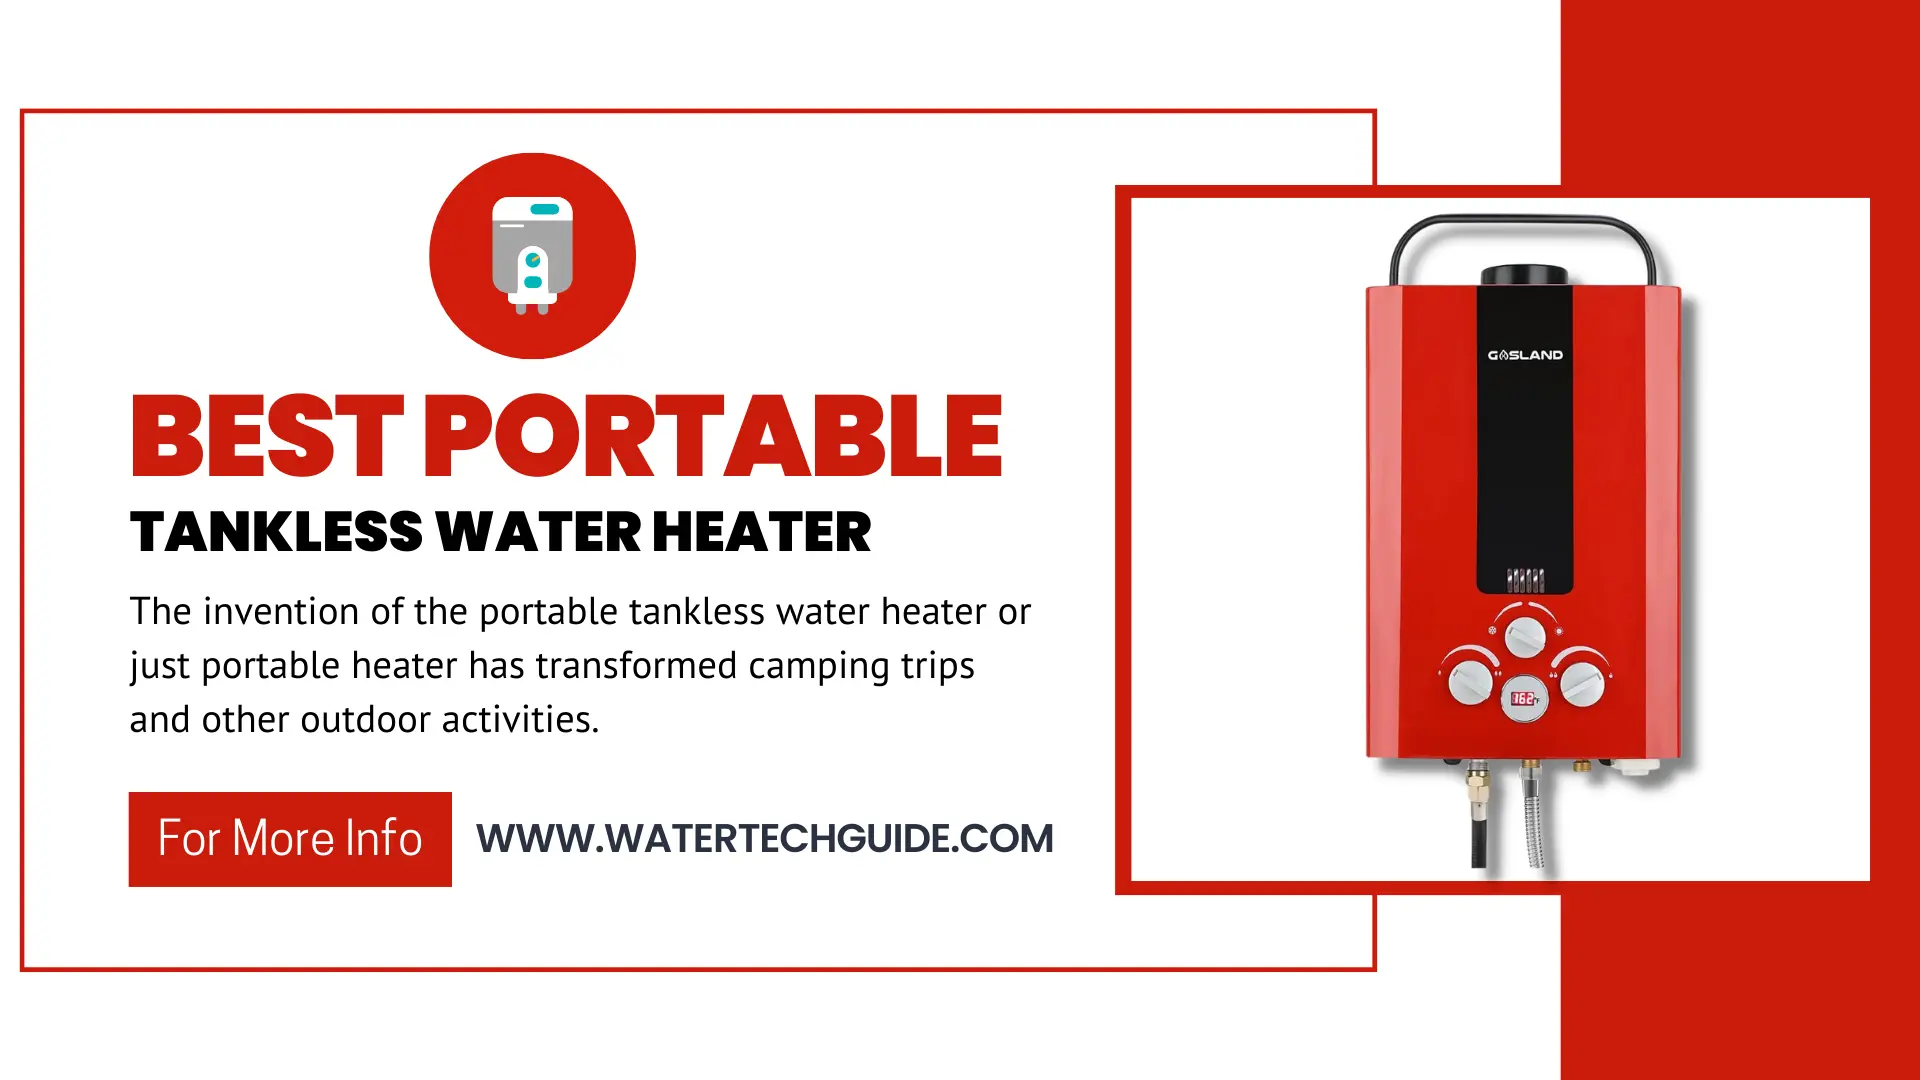 Best Portable Tankless Water Heater